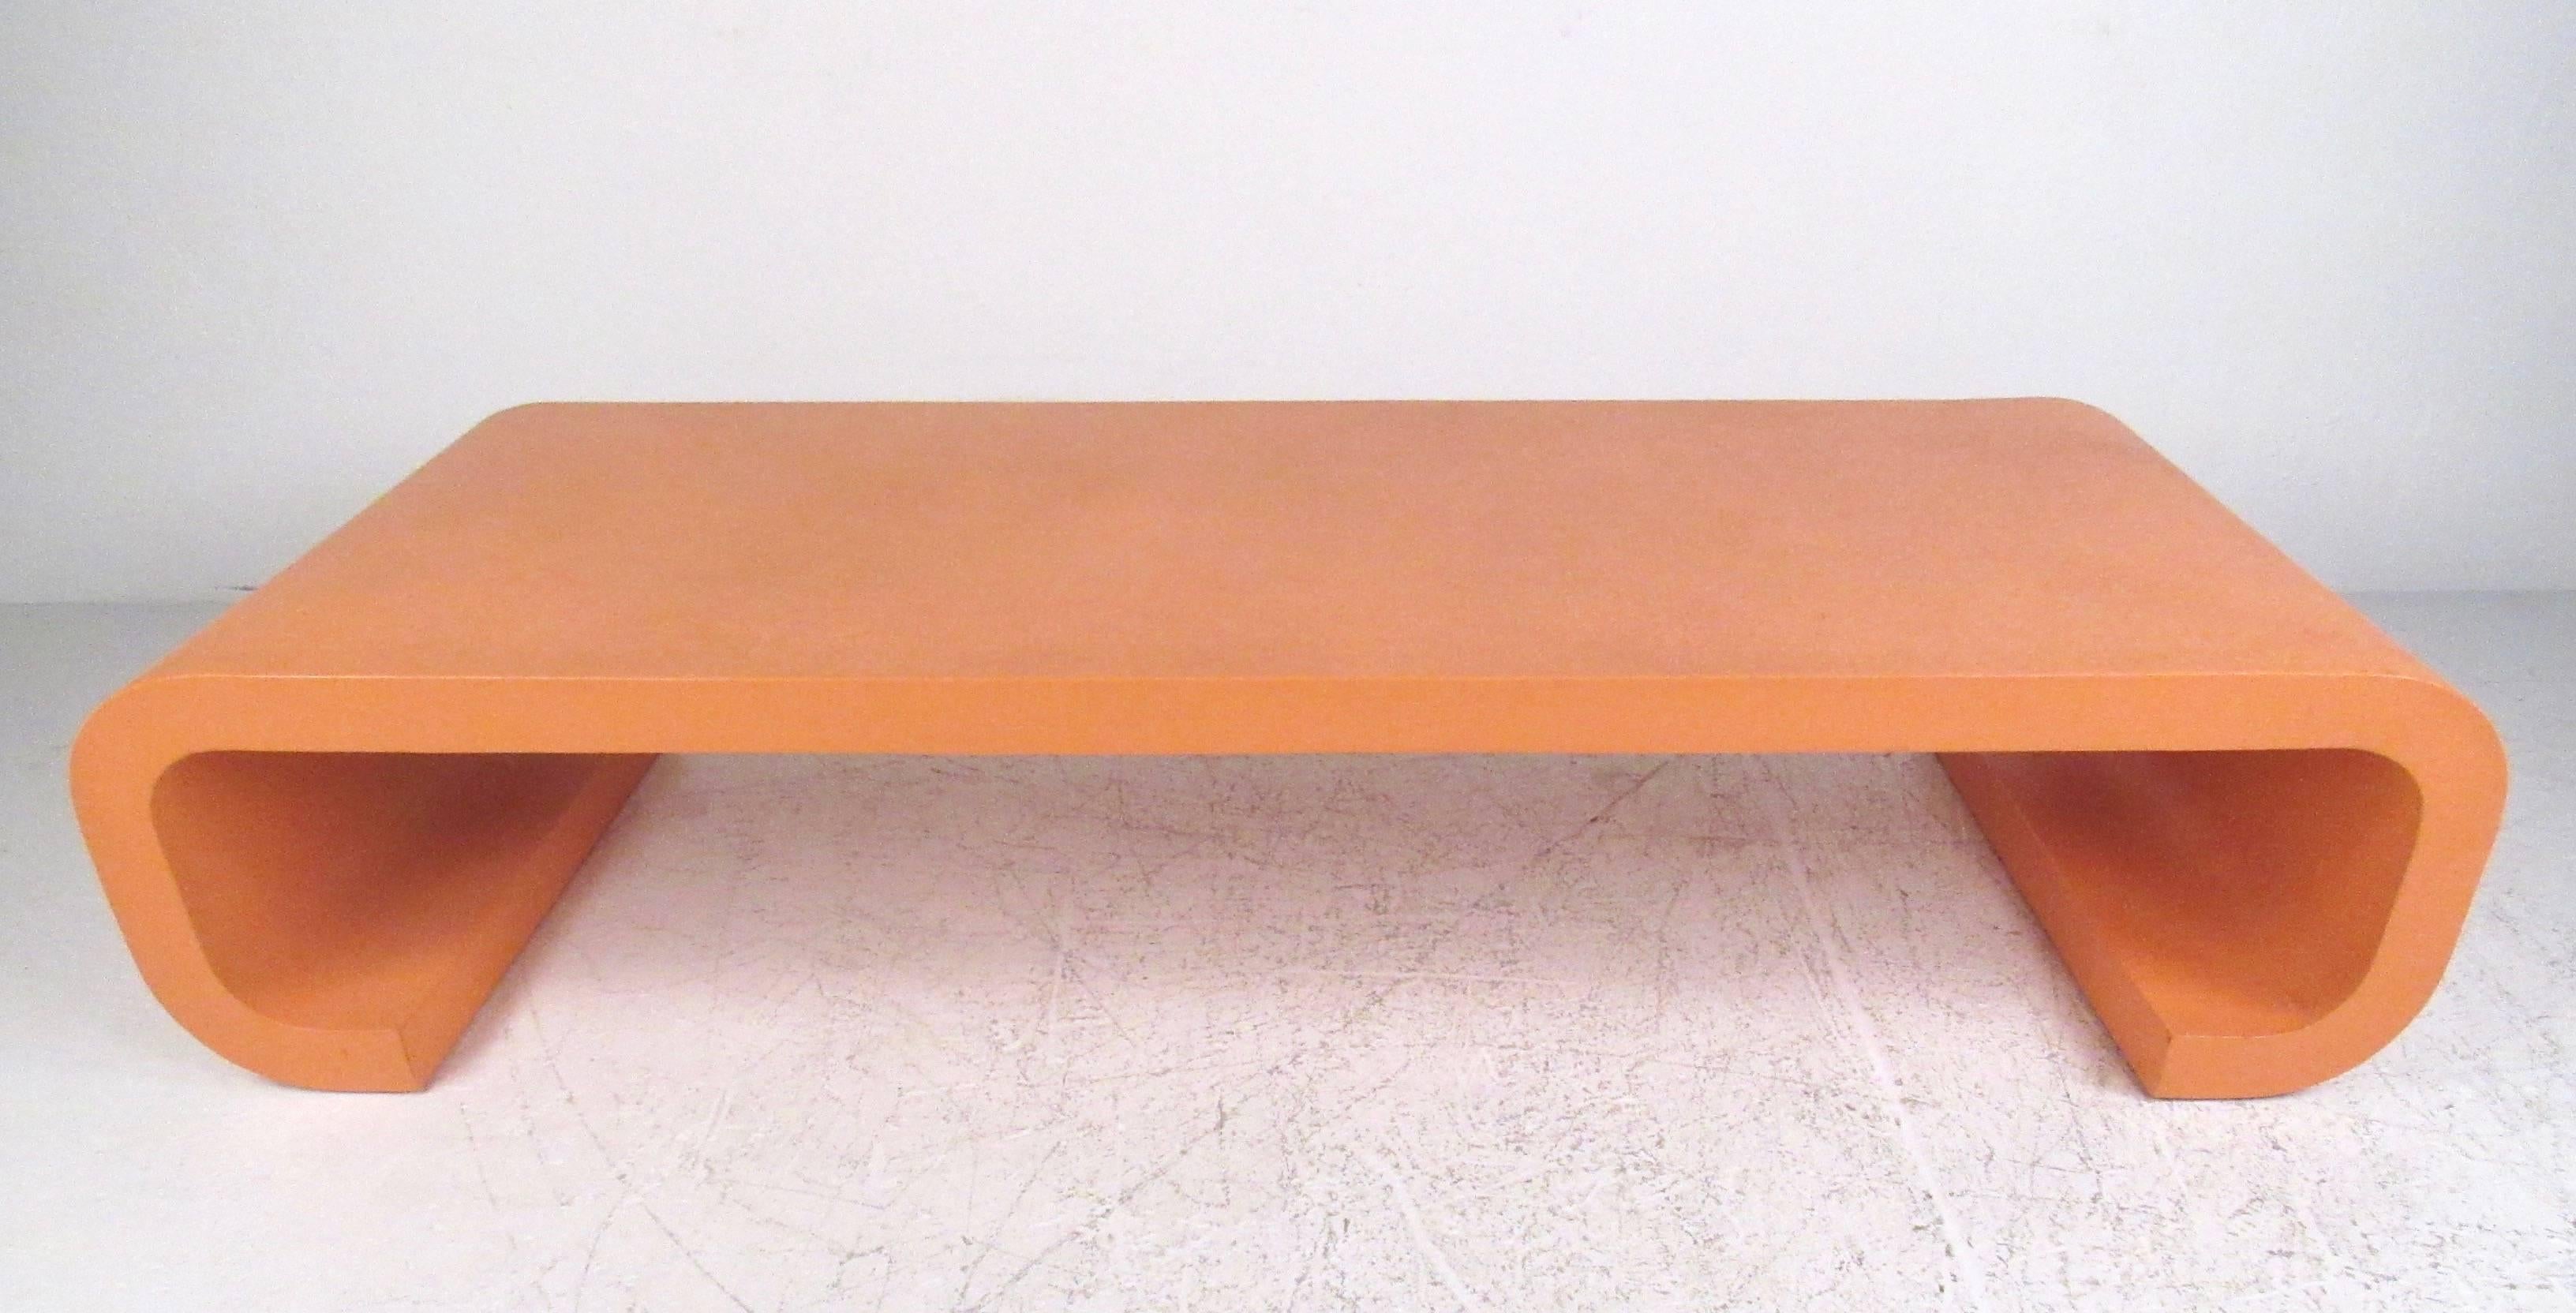 This large grass-cloth finish coffee table has a unique orange/pink paint color, with Karl Springer style scrolled legs. Its impressive color, shape, and size make this Mid-Century coffee table the perfect piece for home or office. Please confirm